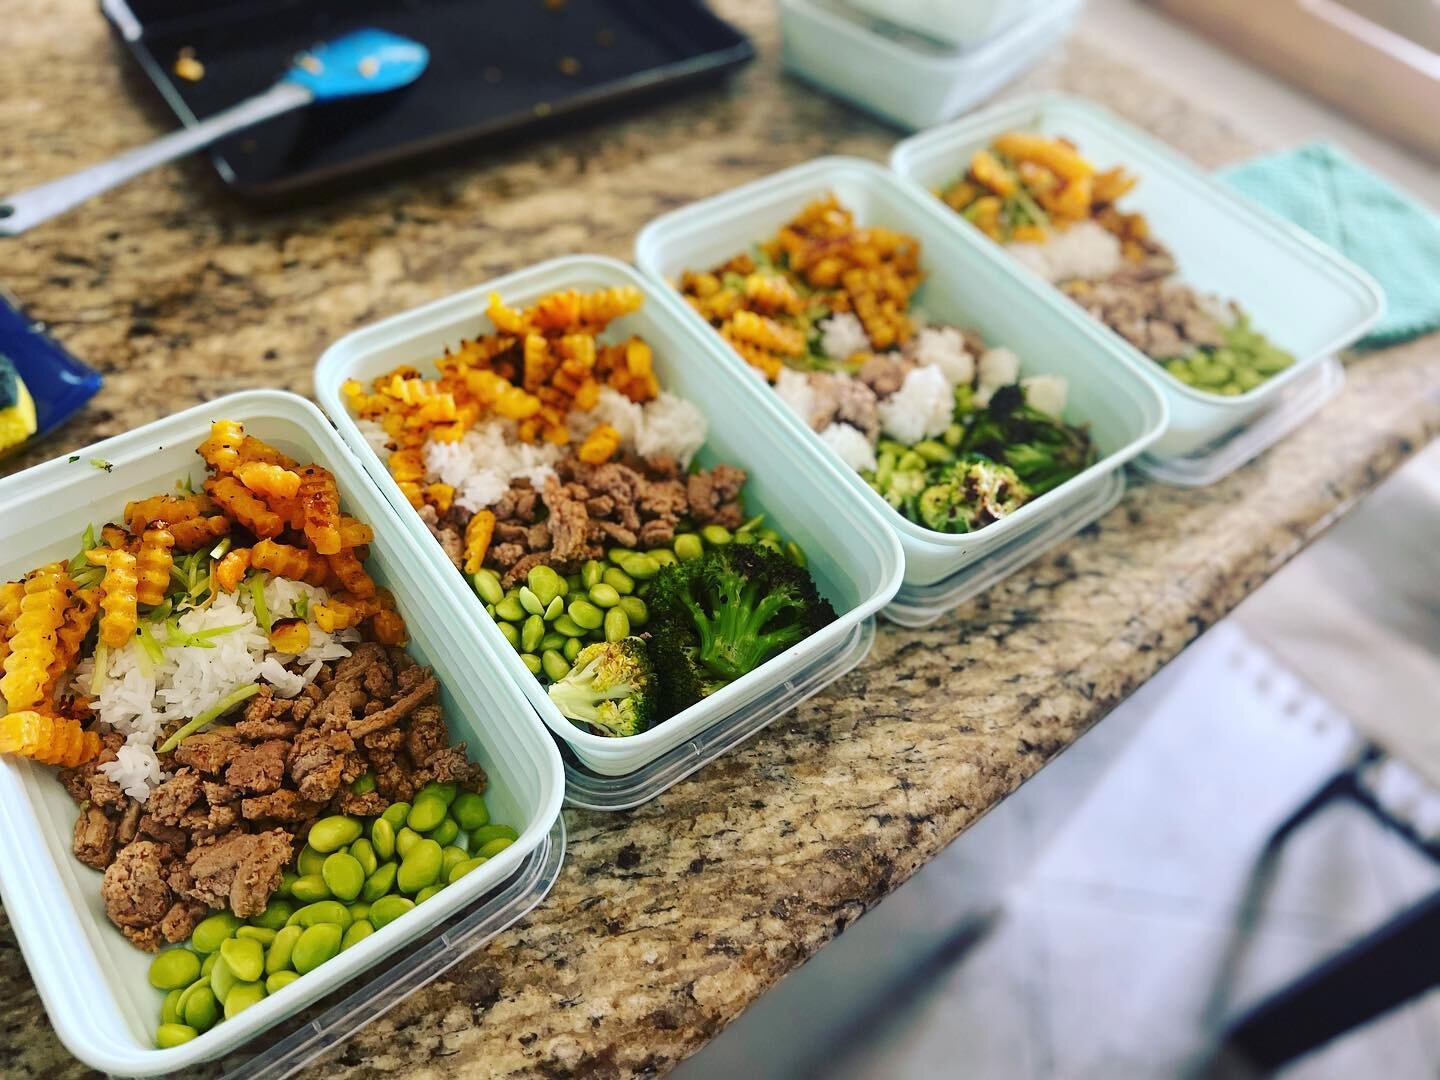 m i n d f u l // eating

I find that when I am more mindful and aware in one area of my life, it bleeds into other areas.
.
I have been meal prepping because if I don&rsquo;t, I eat a whole lot of crap and feel terrible. 
.
I love doing it. 
I make t